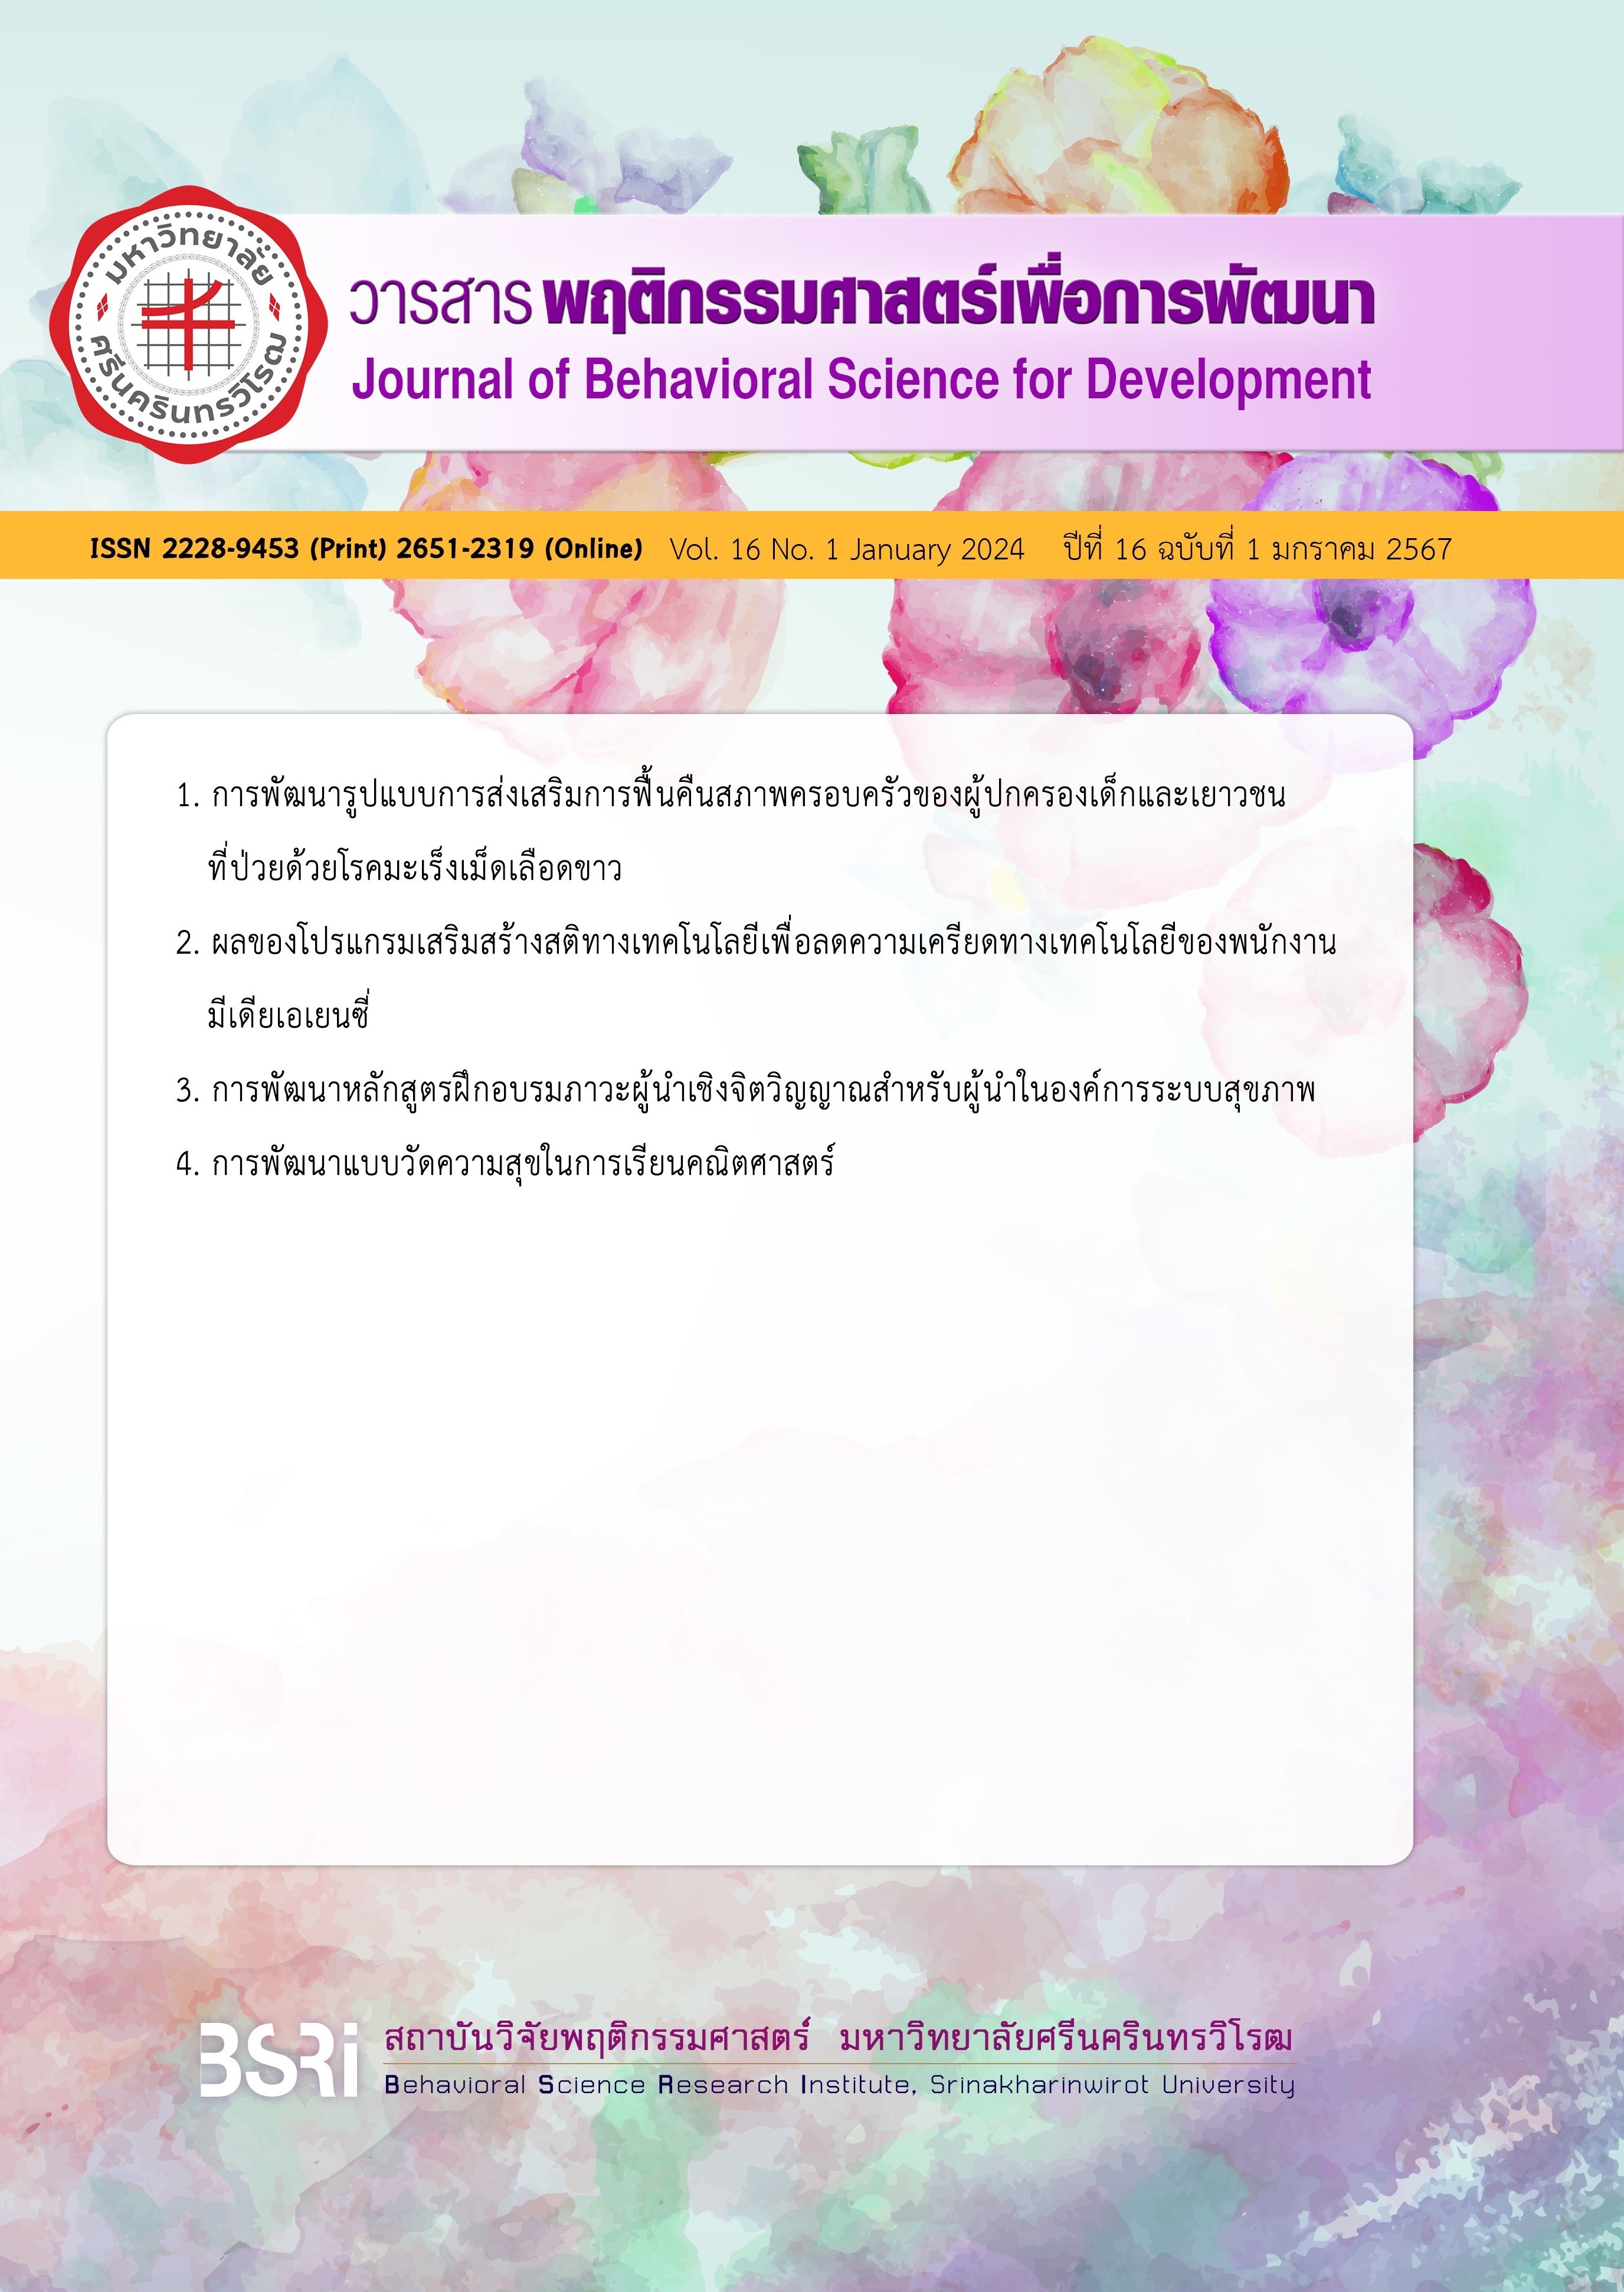 					View Vol. 16 No. 1 (2024): Vol. 16 No. 1 (2024): Journal of Behavioral Science for Development Vol. 16 Issue 1 January 2024
				